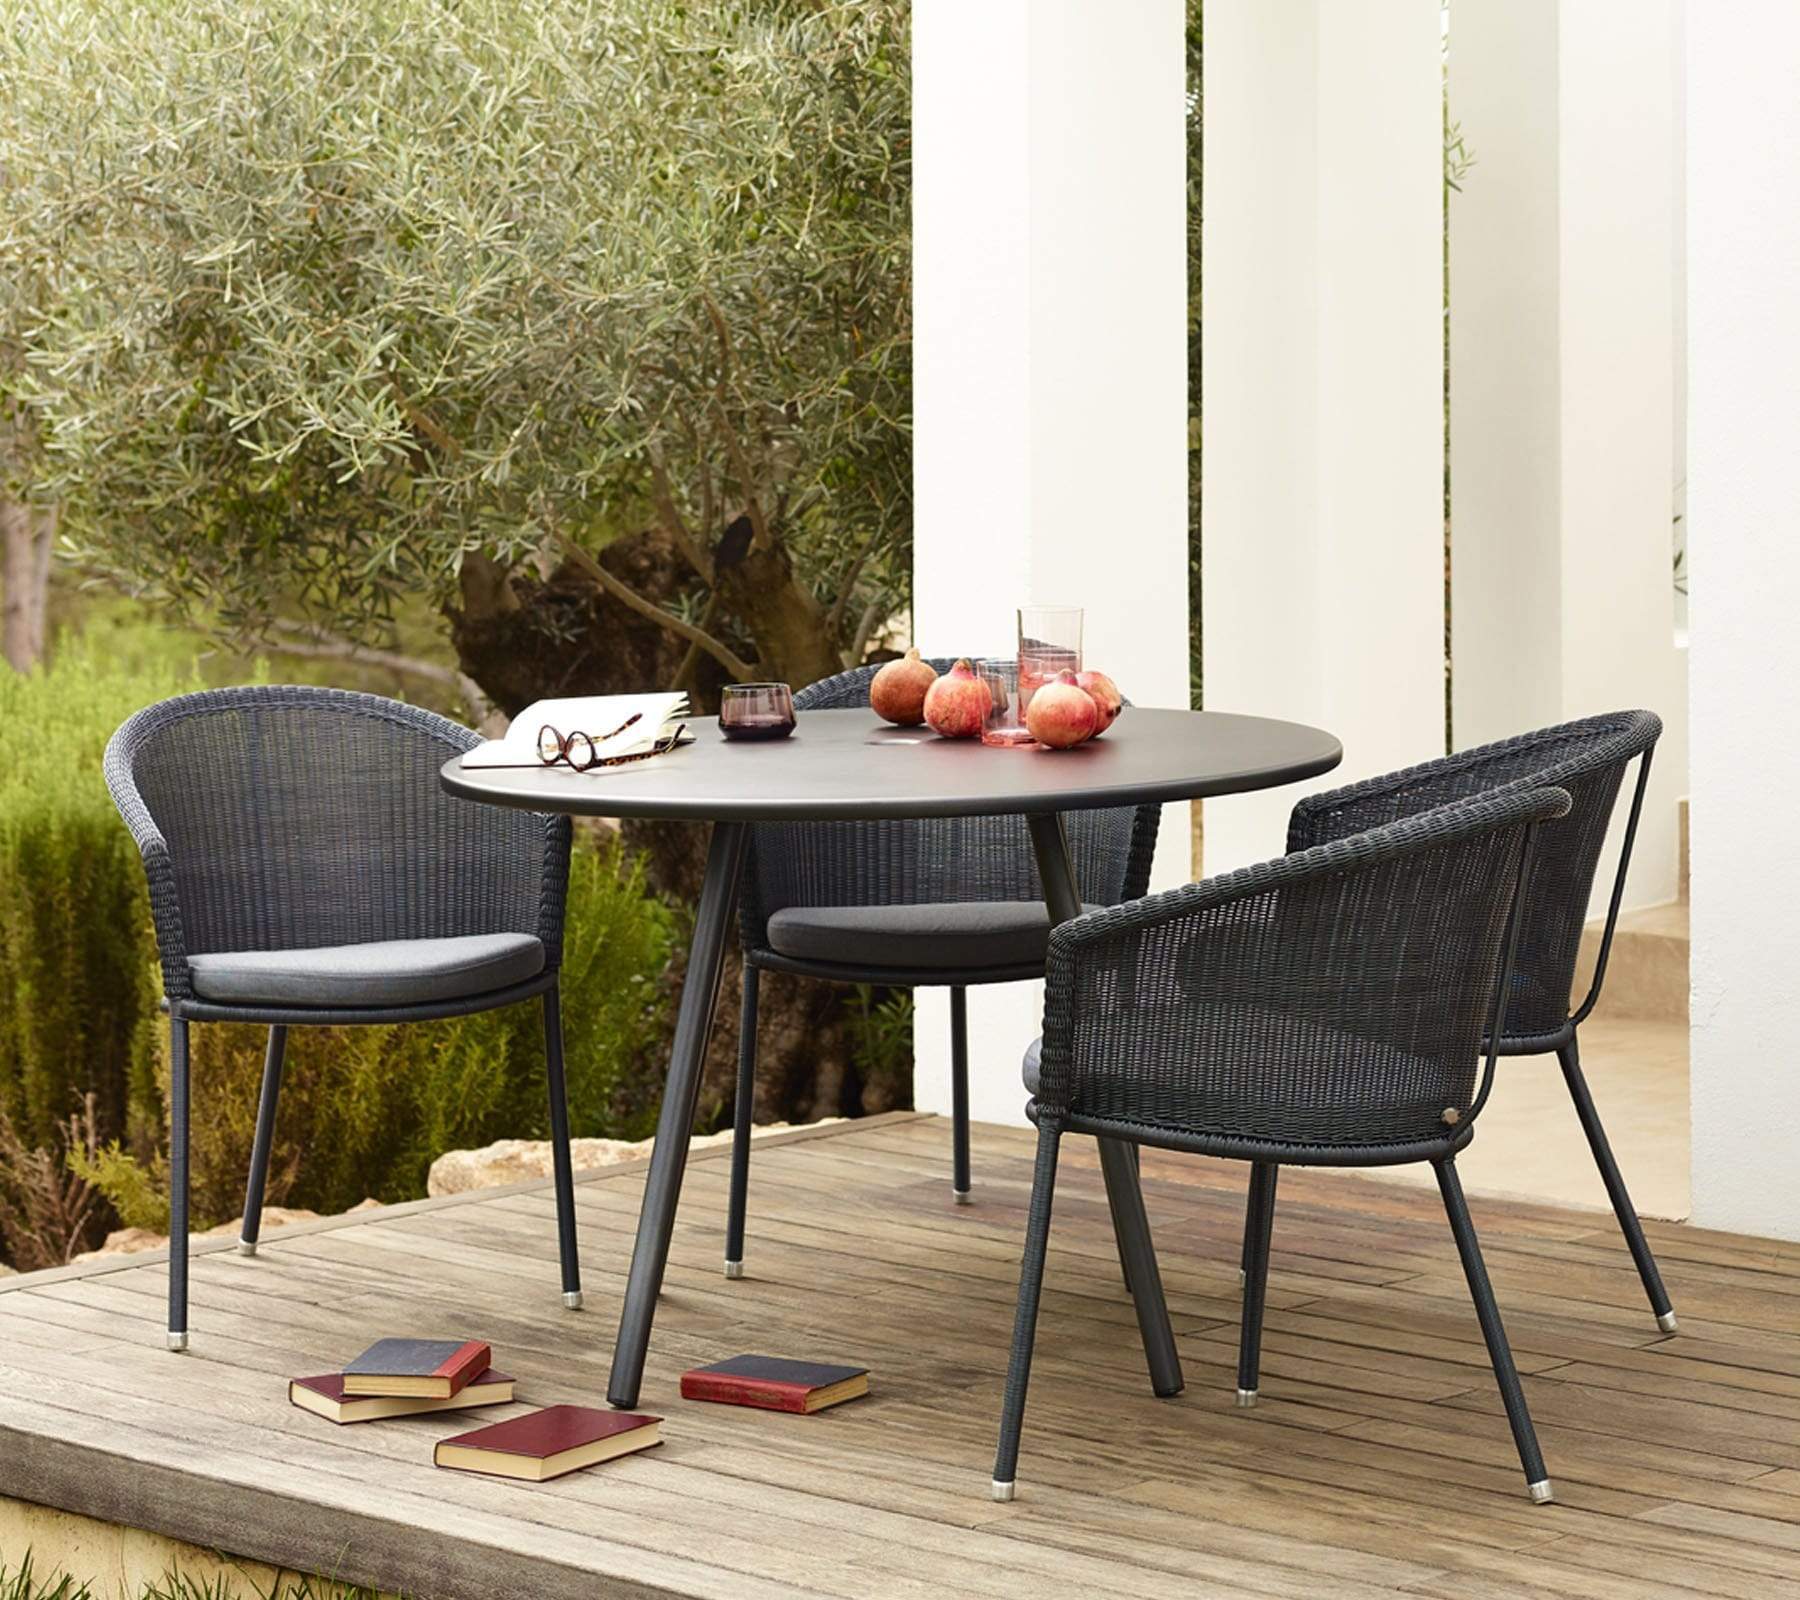  Boxhill's Trinity dark grey outdoor stackable chair with dark grey round dining table placed on wooden platform